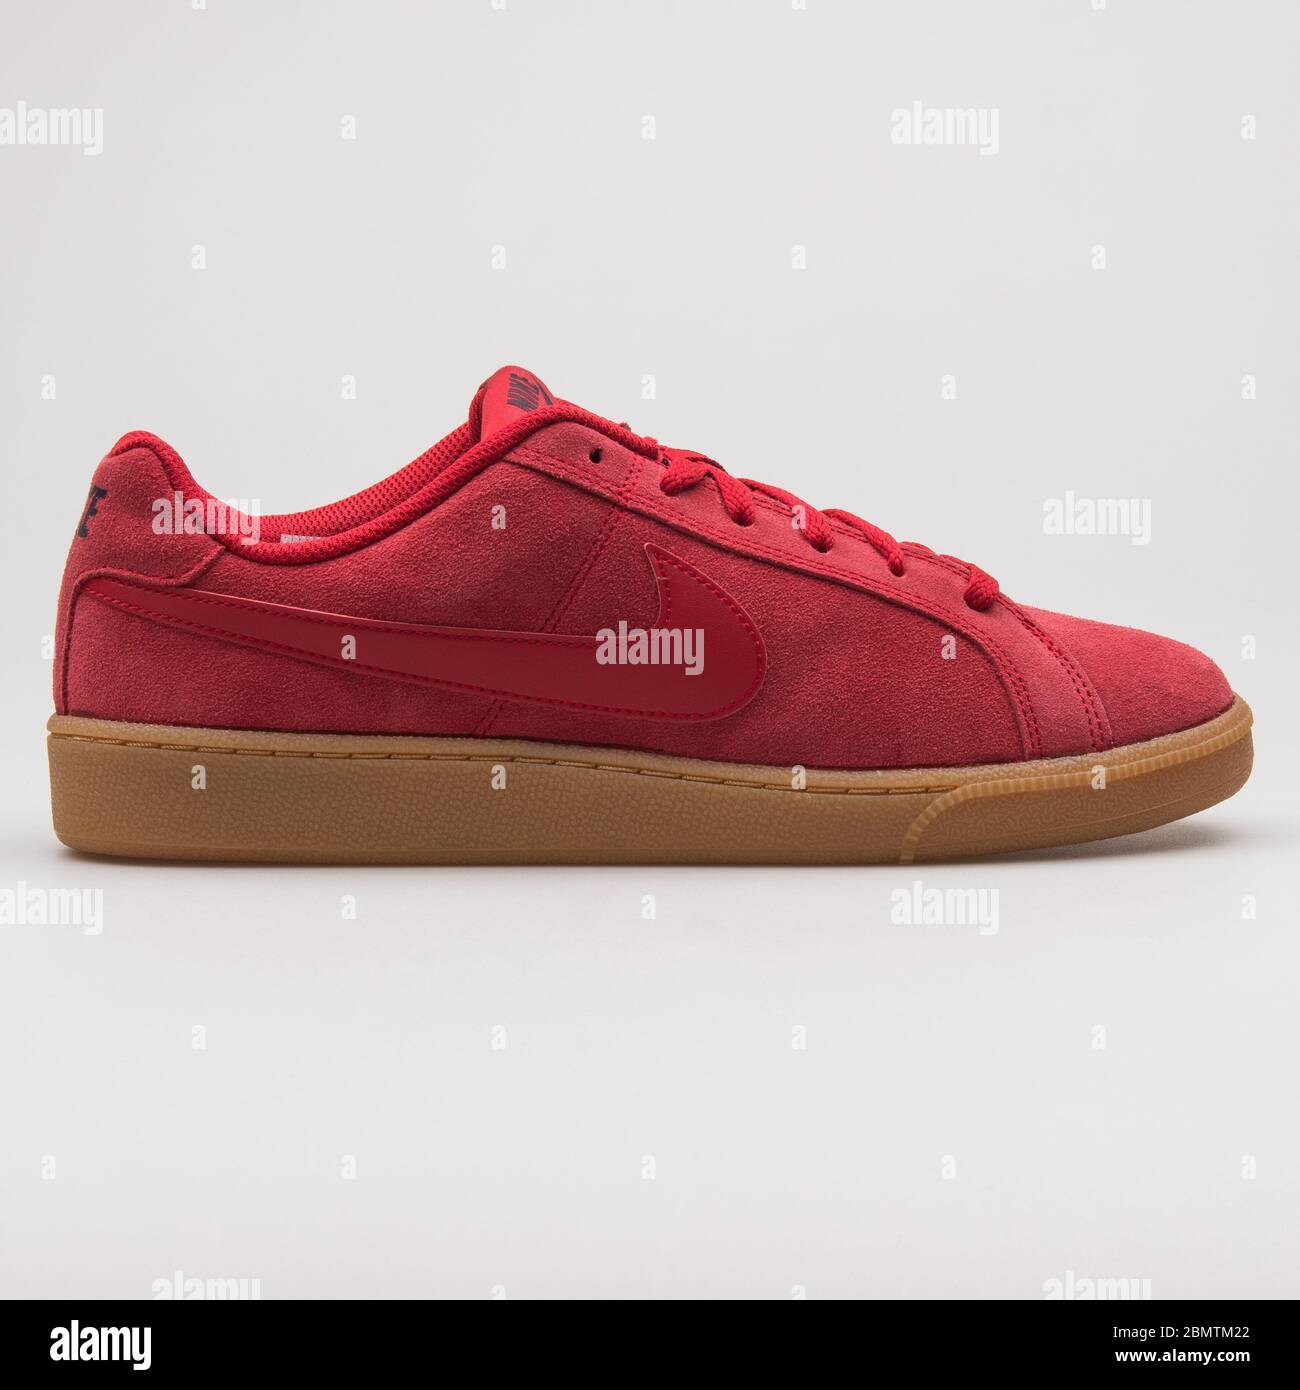 VIENNA, AUSTRIA - FEBRUARY 19, 2018: Nike Court Royale Suede red and brown  sneaker on white background Stock Photo - Alamy